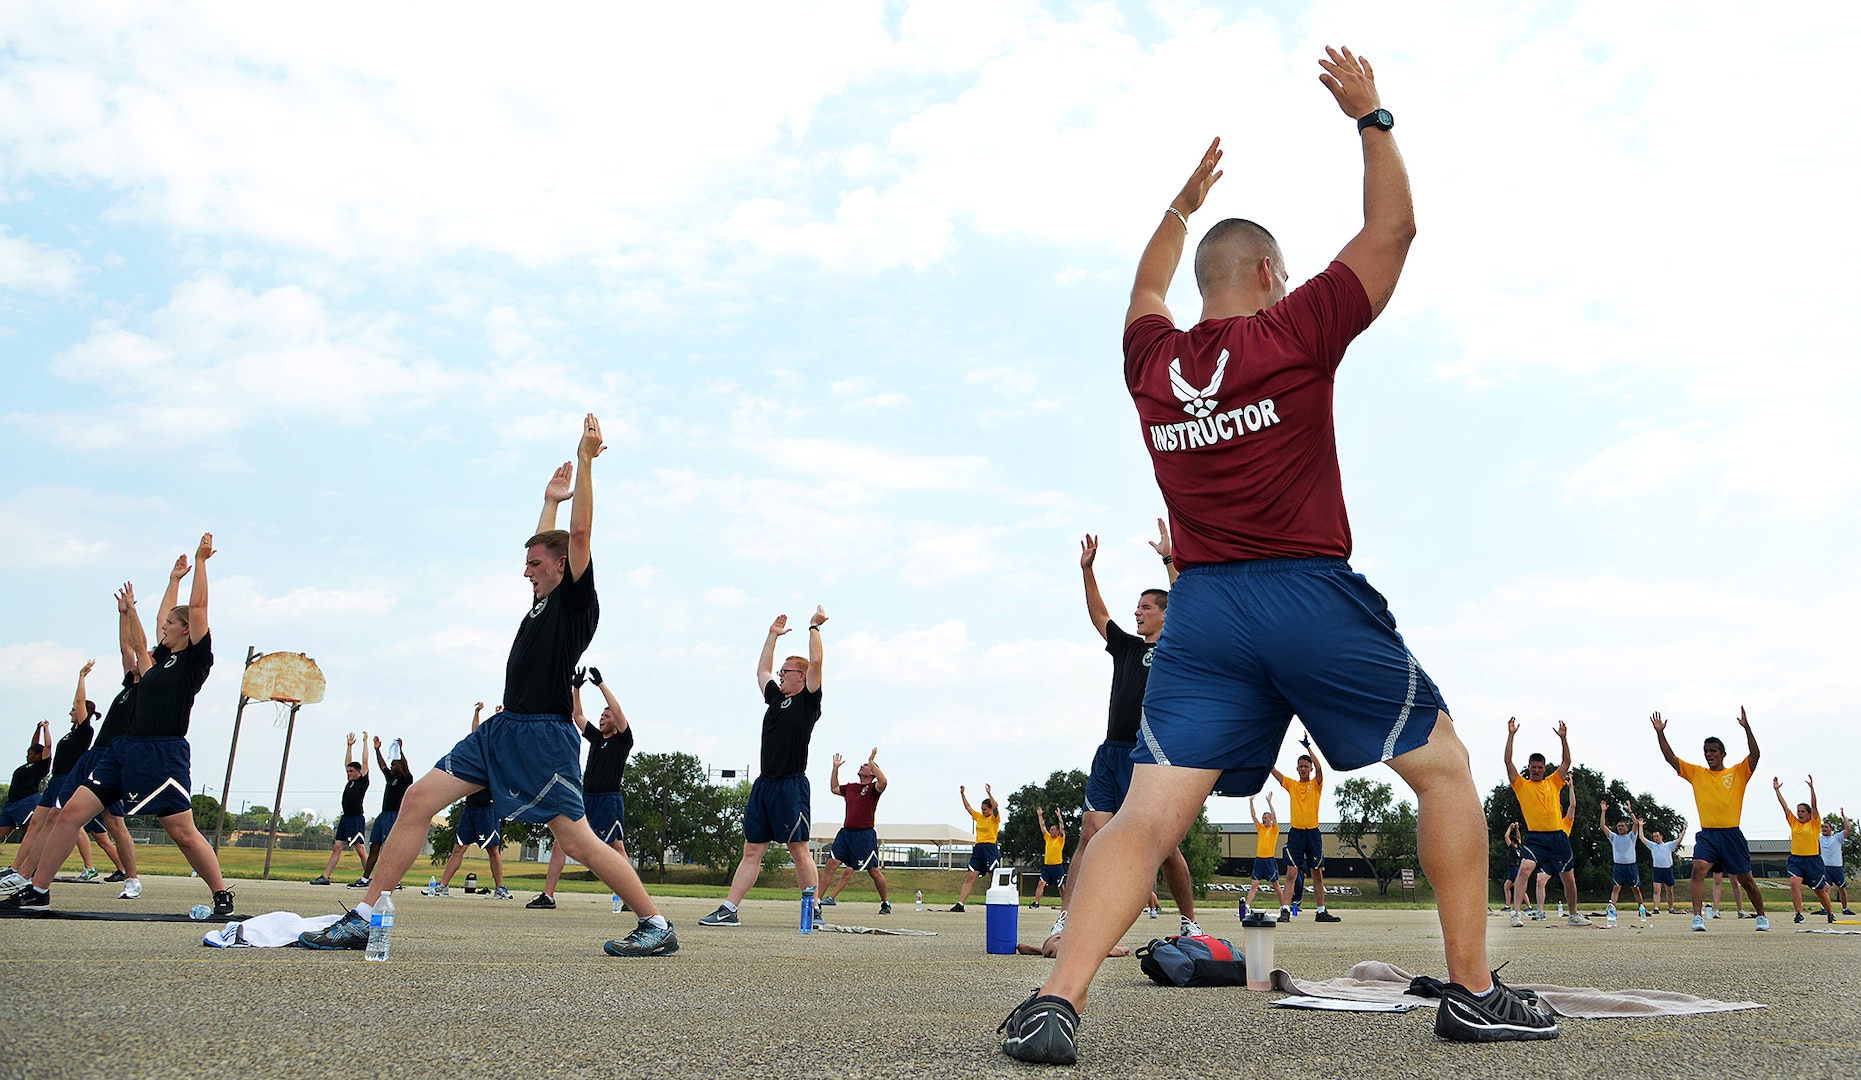 Staff Sgt. Thomas McKerlie, 802nd Force Support Squadron Blackhawk flight instructor, leads the Airman Leadership School in the weekly warrior workout August 19, at Joint Base San Antonio-Lackland. (U.S. Air Force photo by Benjamin Faske/released)